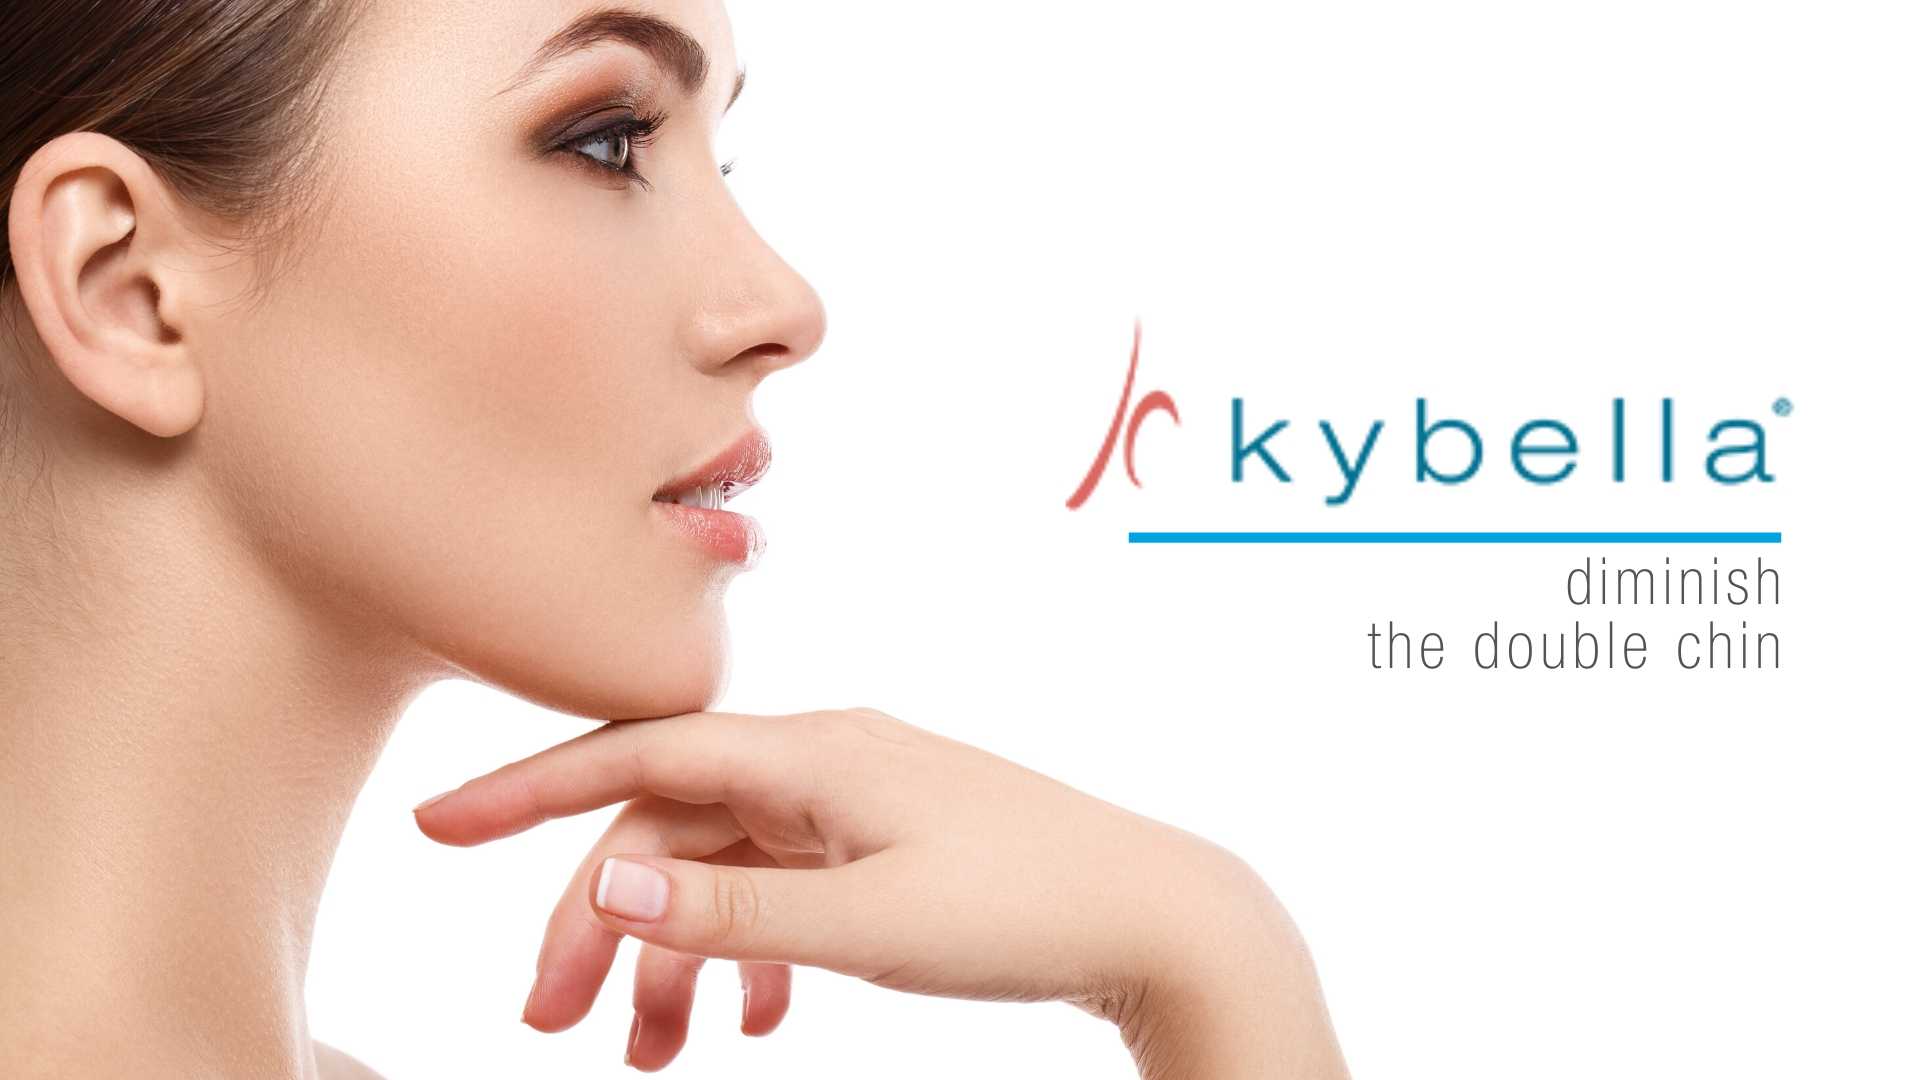 Woman touches her defined chin after kybella treatment.